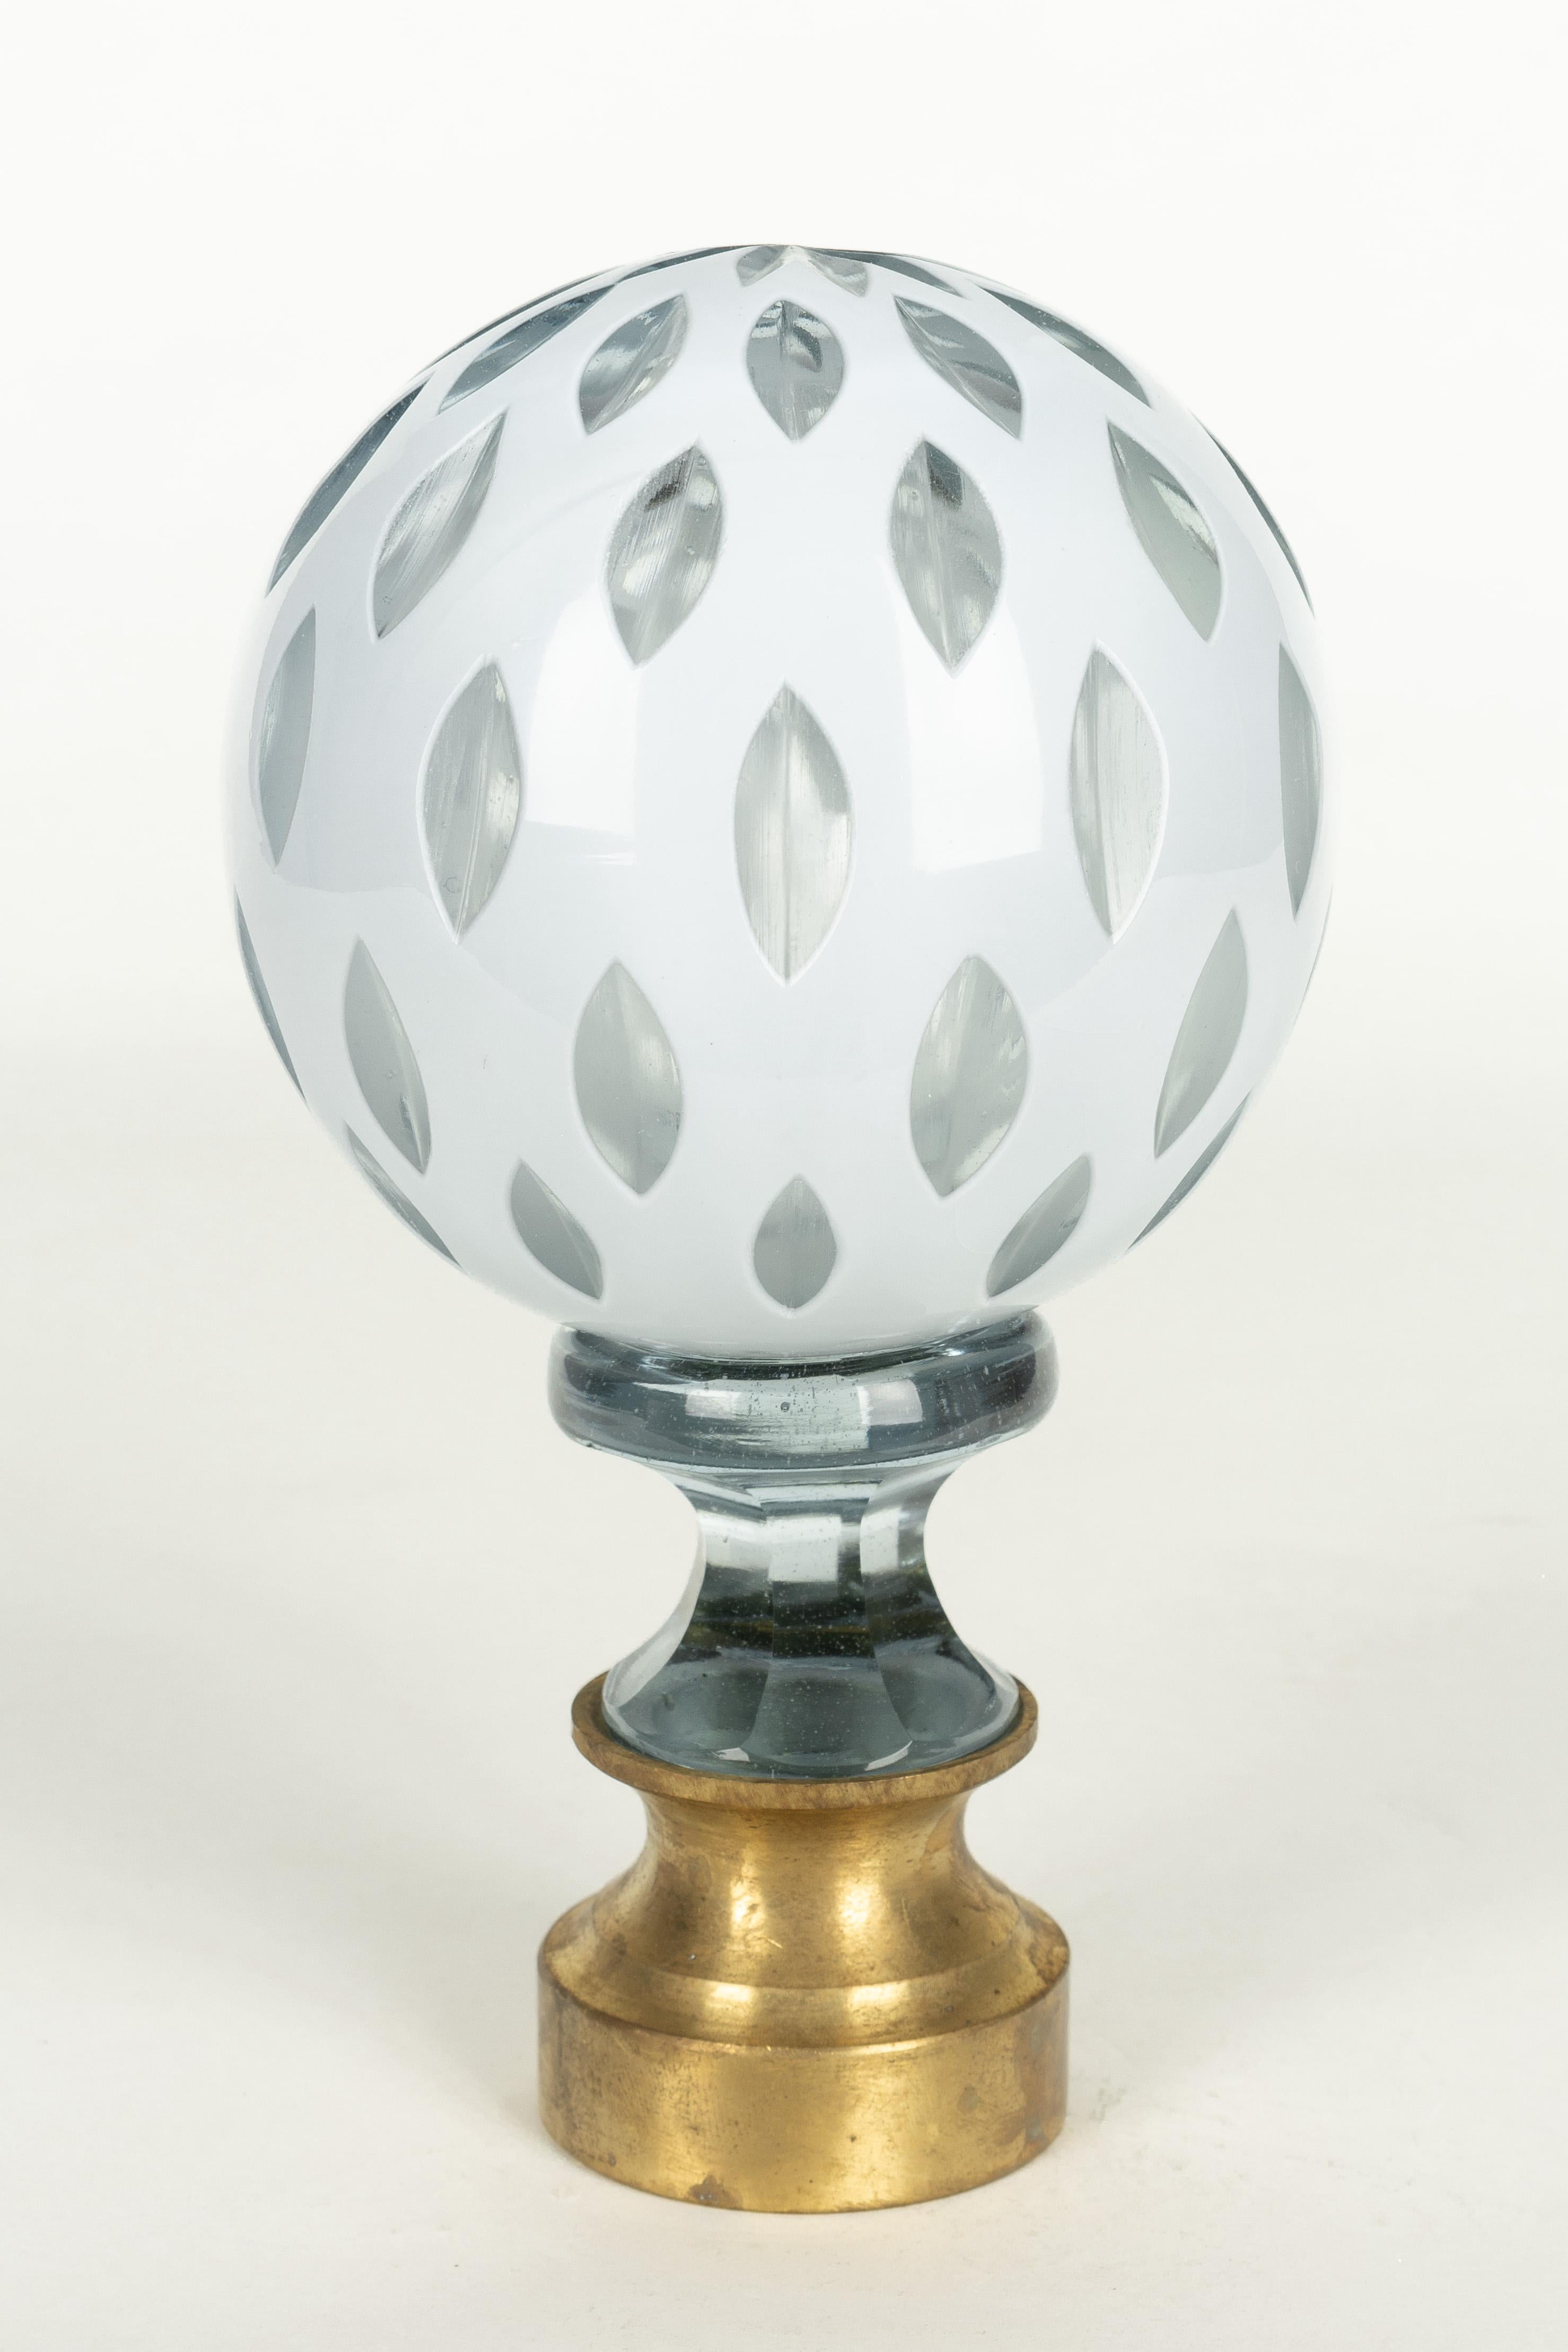 A French crystal newel post finial or boule d'escalier. Made of two layers of cased glass with the white glass surface cut to reveal clear glass underneath. Brass hardware base. These wonderful finials were used as decorative elements at the bottom